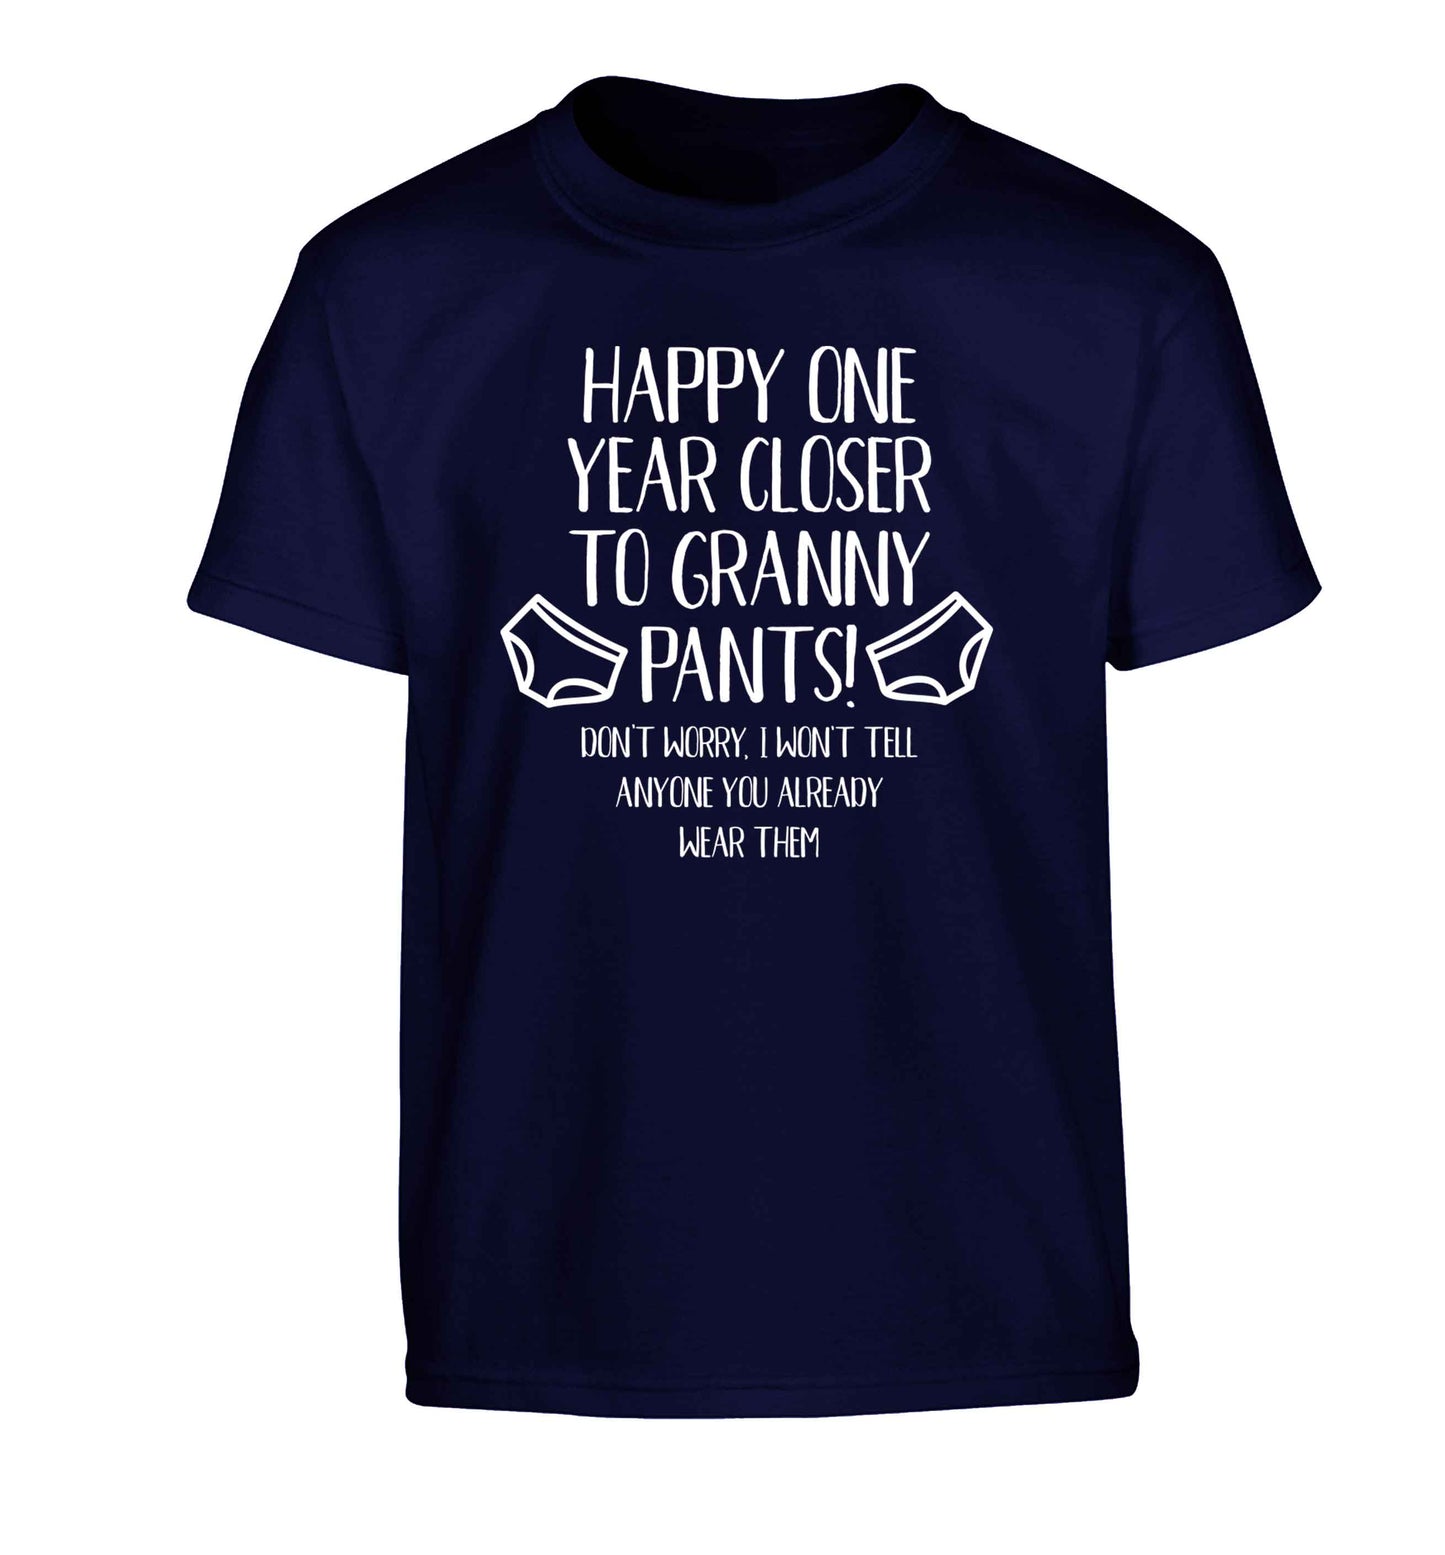 Happy one year closer to granny pants Children's navy Tshirt 12-13 Years